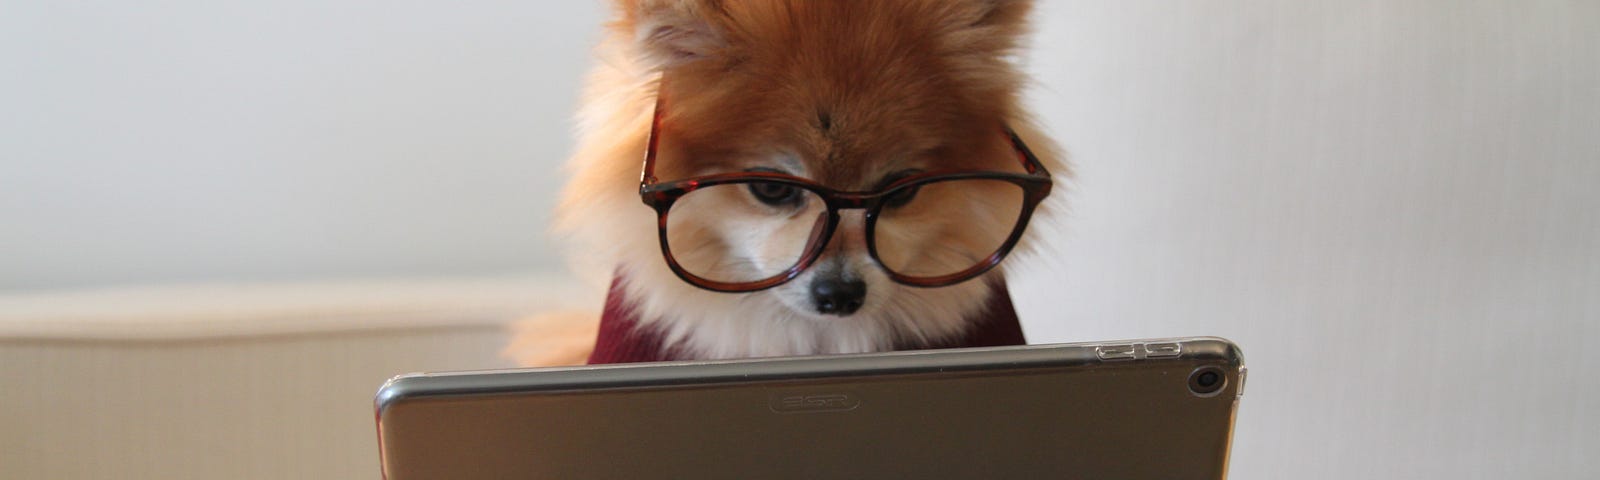 A dog wearing glasses sitting in front of an Ipad.